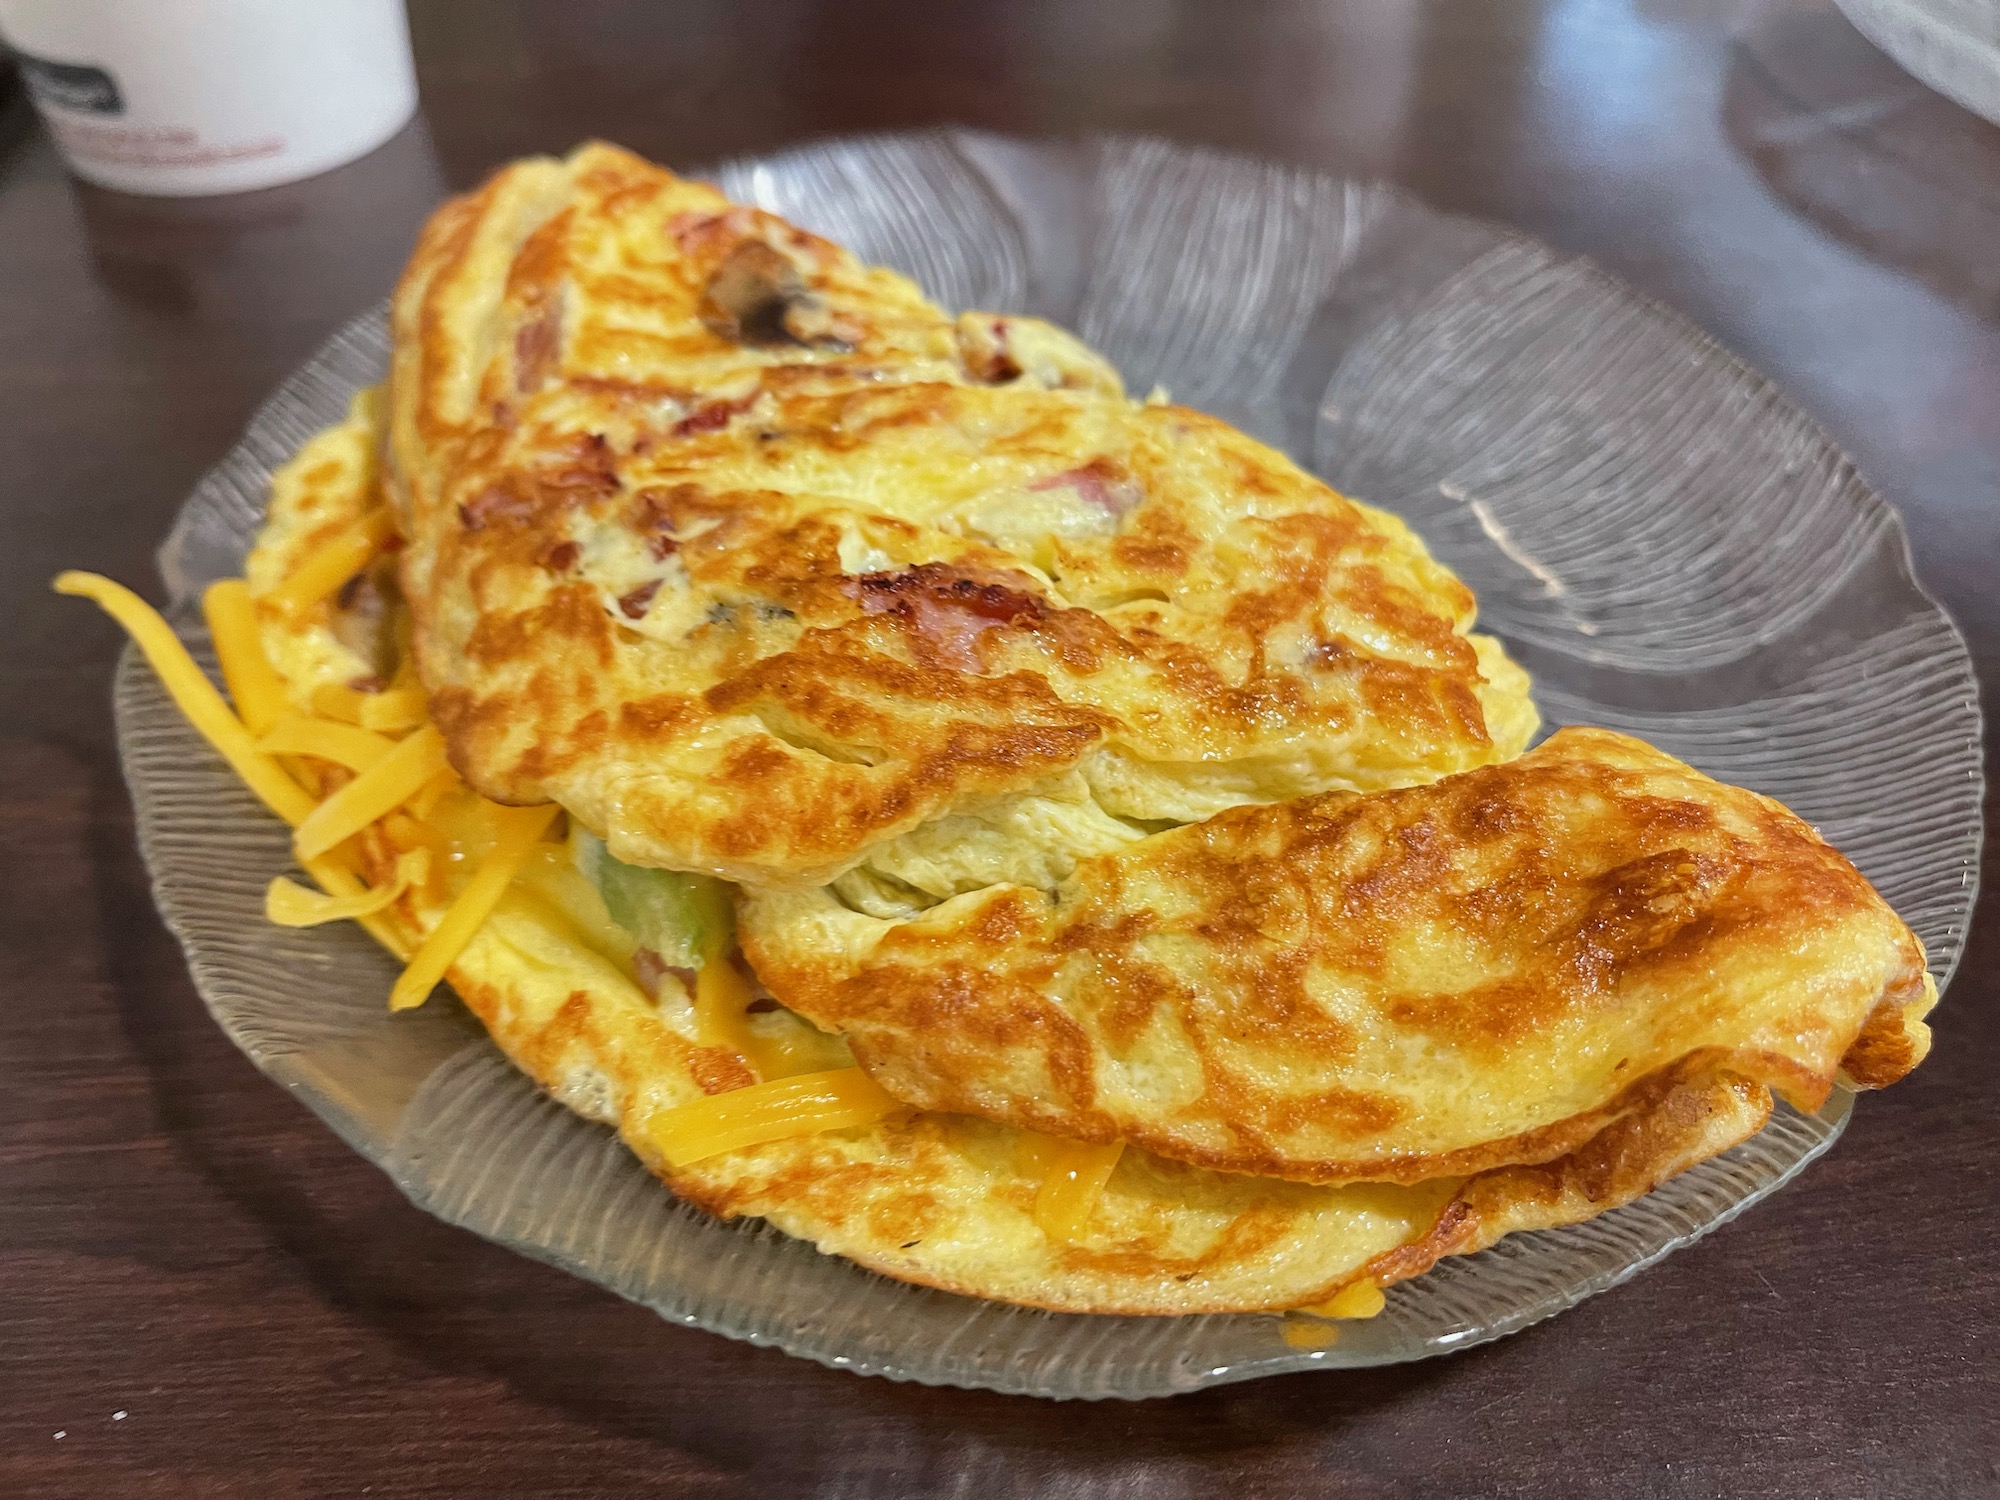 a plate of omelette on a wood table